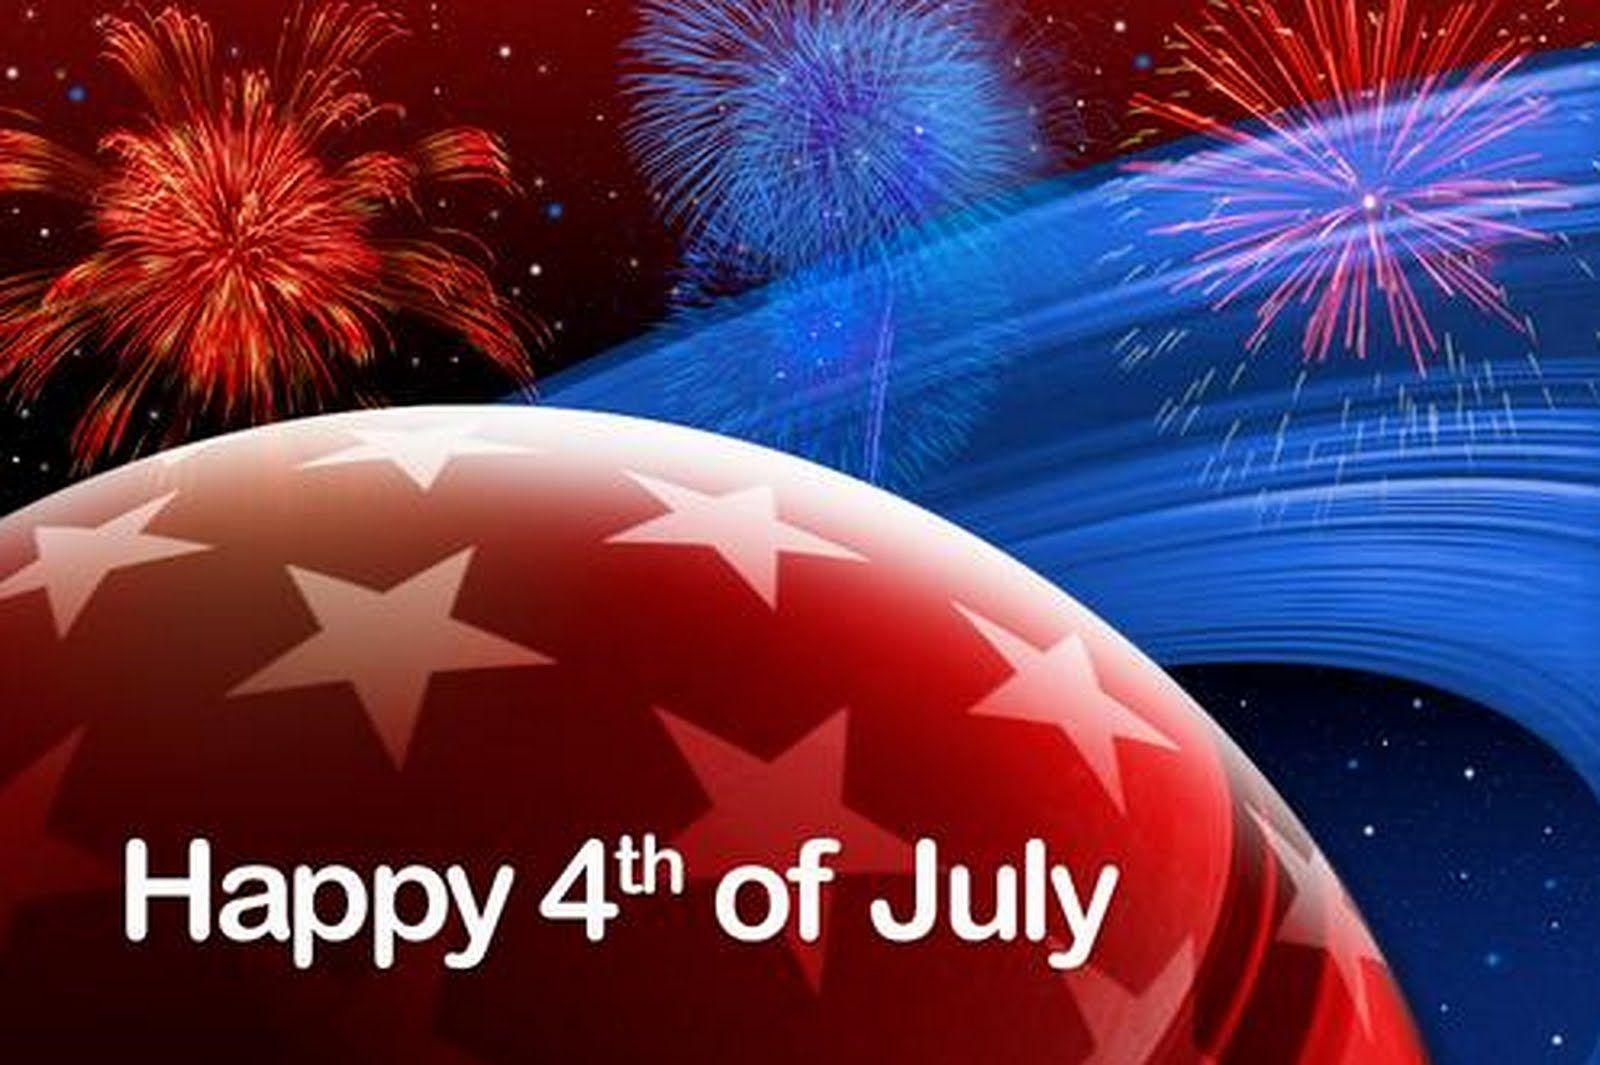 Happy 4th of July Image Picture, Photo, HD Wallpaper